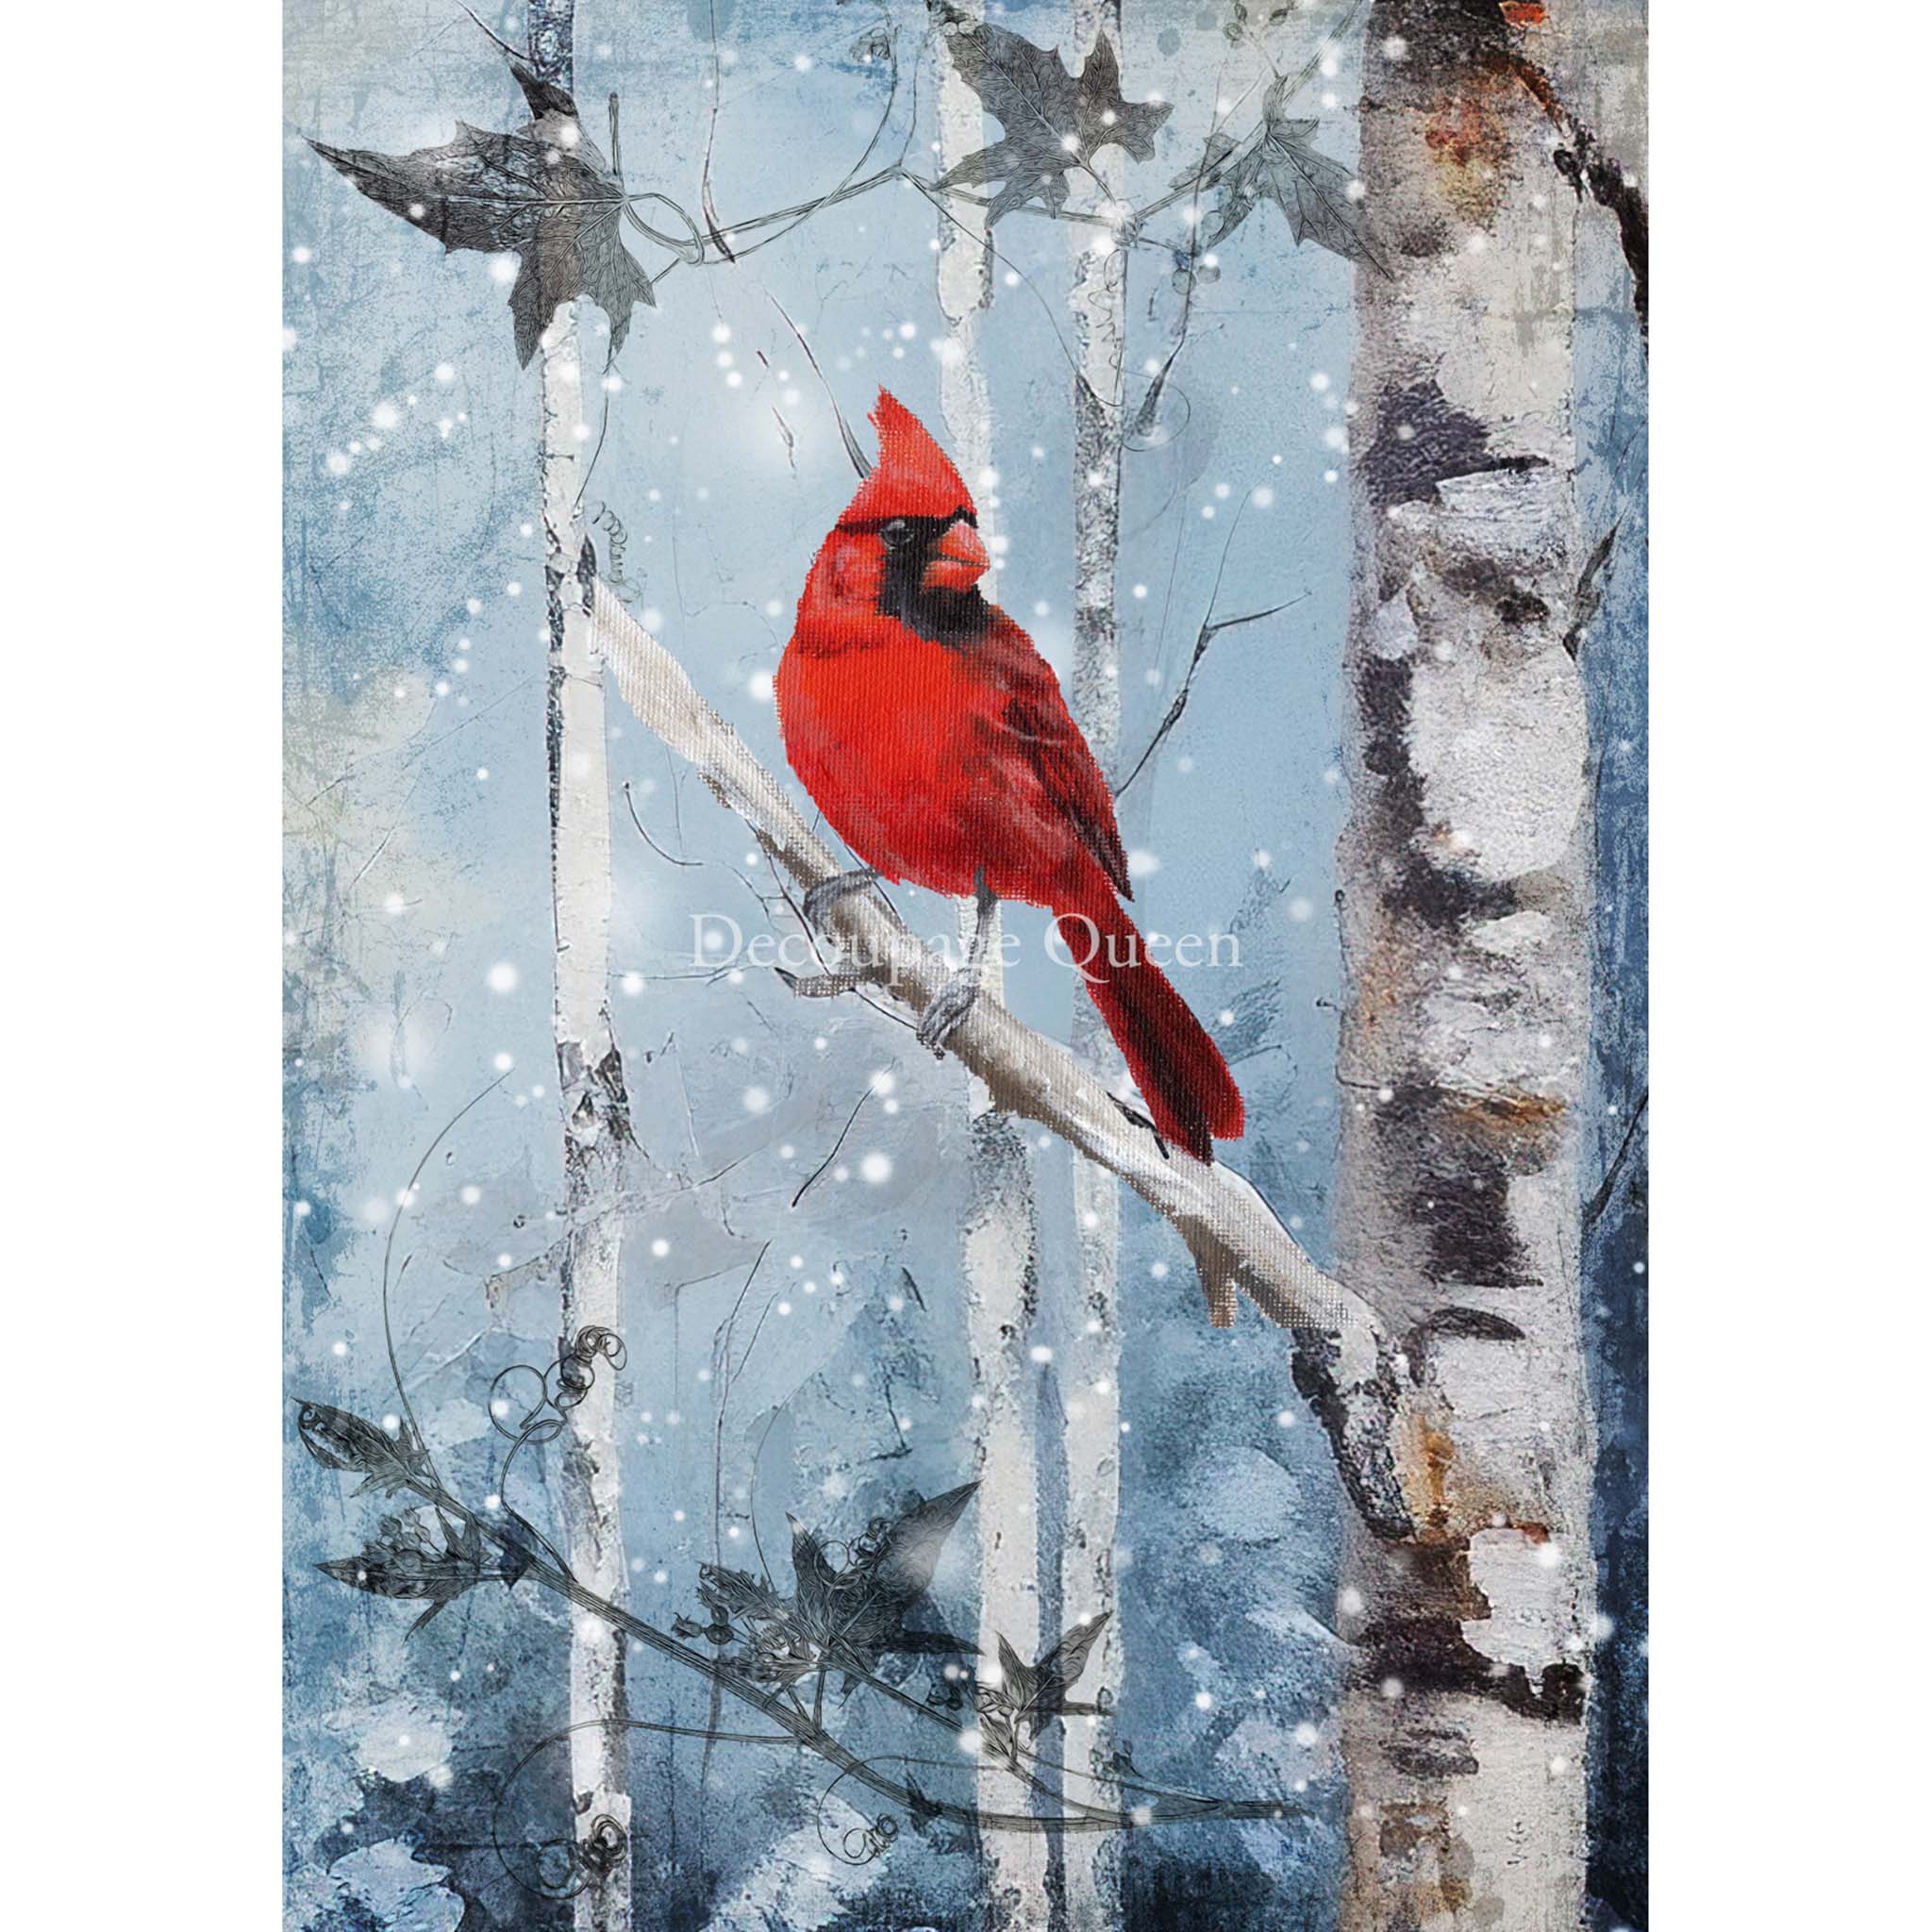 A3 rice paper design featuring a cardinal perched on a snow-covered birch limb. White borders are on the sides.